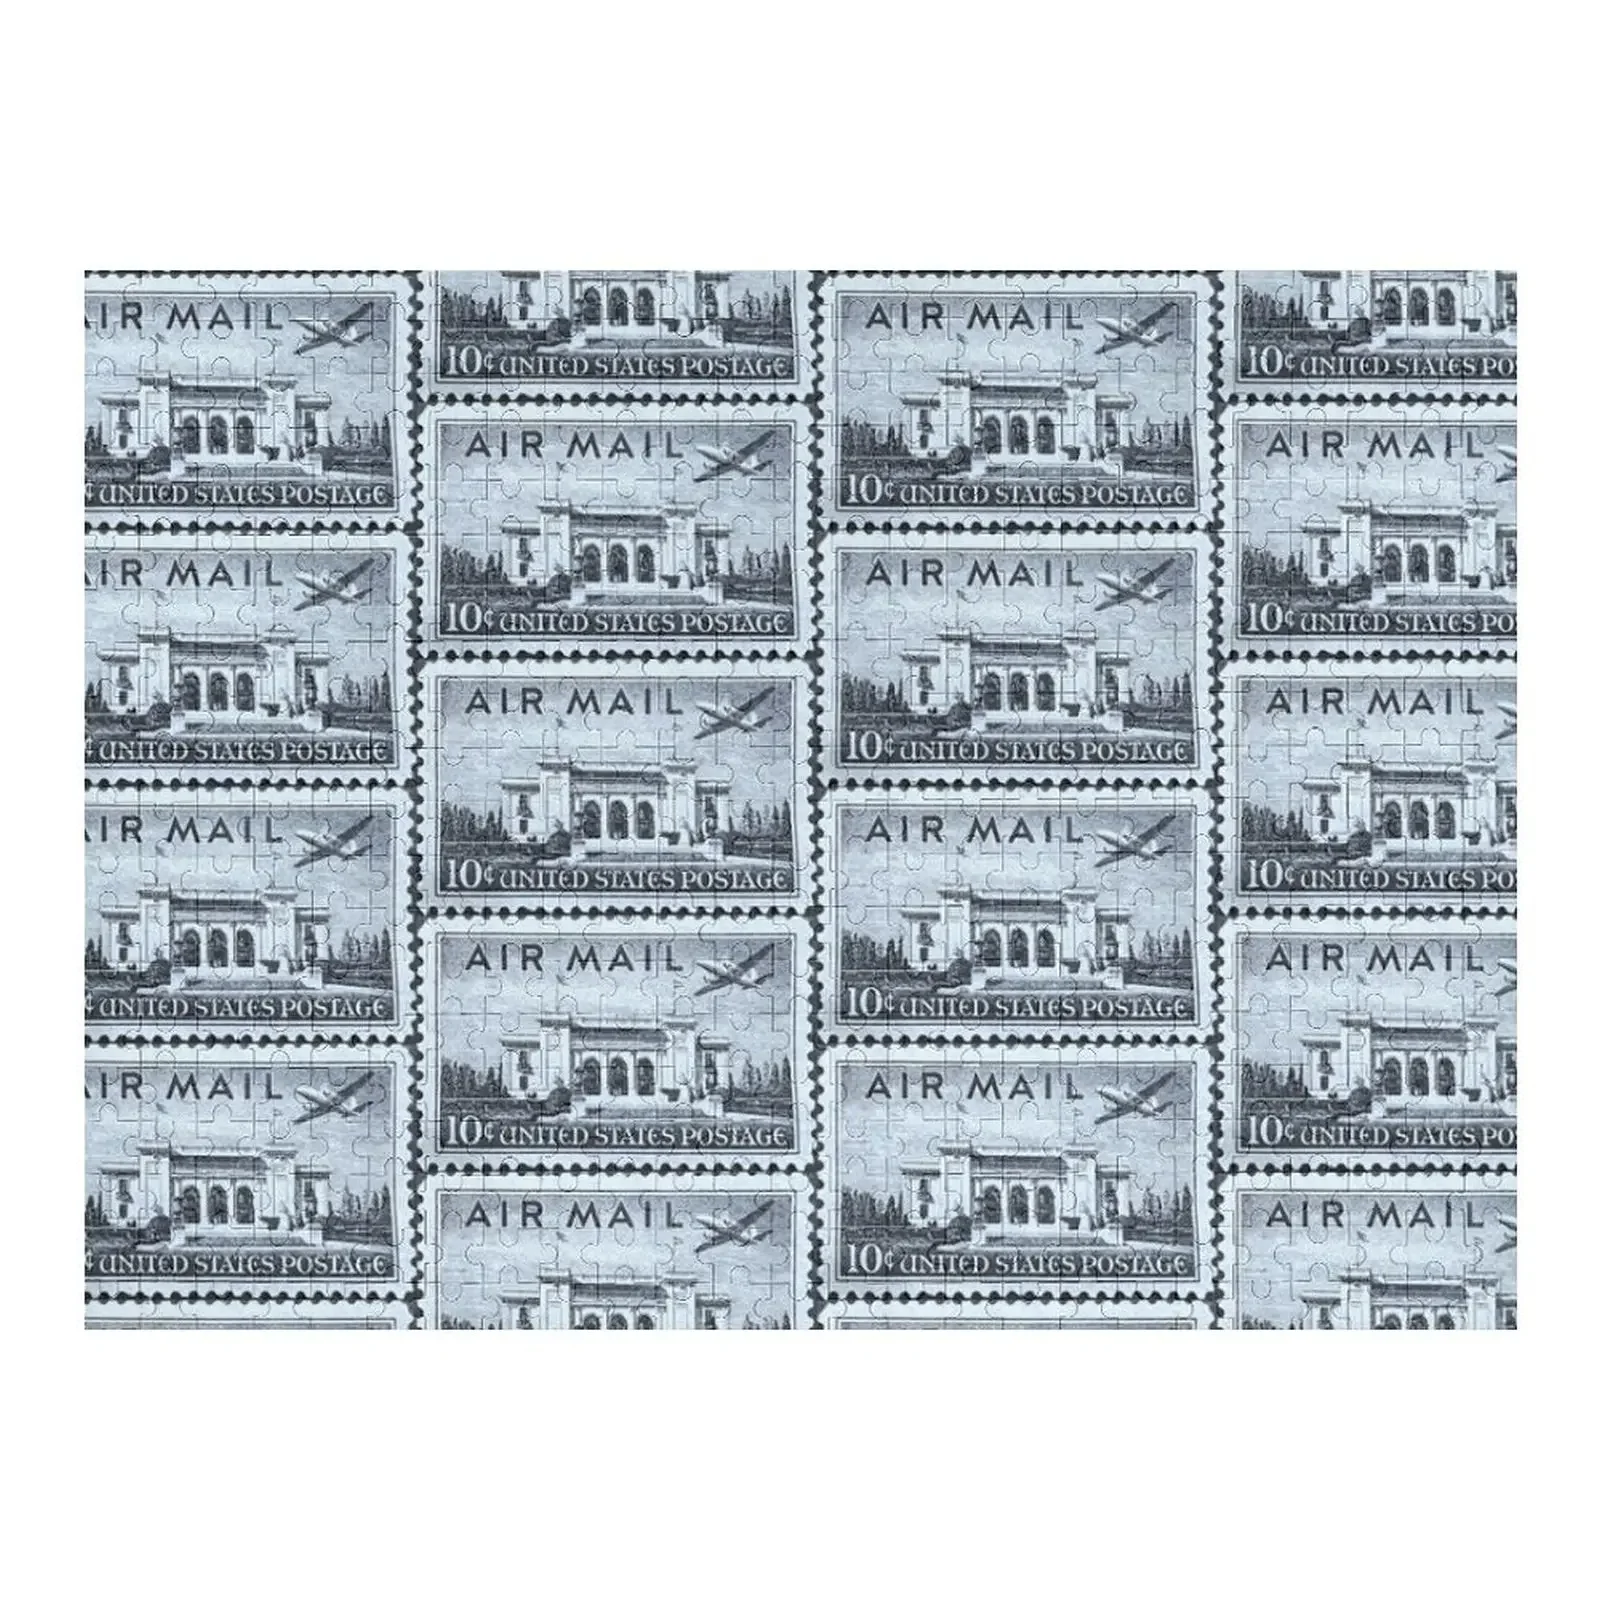 Pan American Building Air Mail Vintage Postage Stamp Jigsaw Puzzle Photo Iq Jigsaw Custom Works Of Art Puzzle vintage illustration of edinburgh from samson s ribs jigsaw puzzle photo works of art puzzle